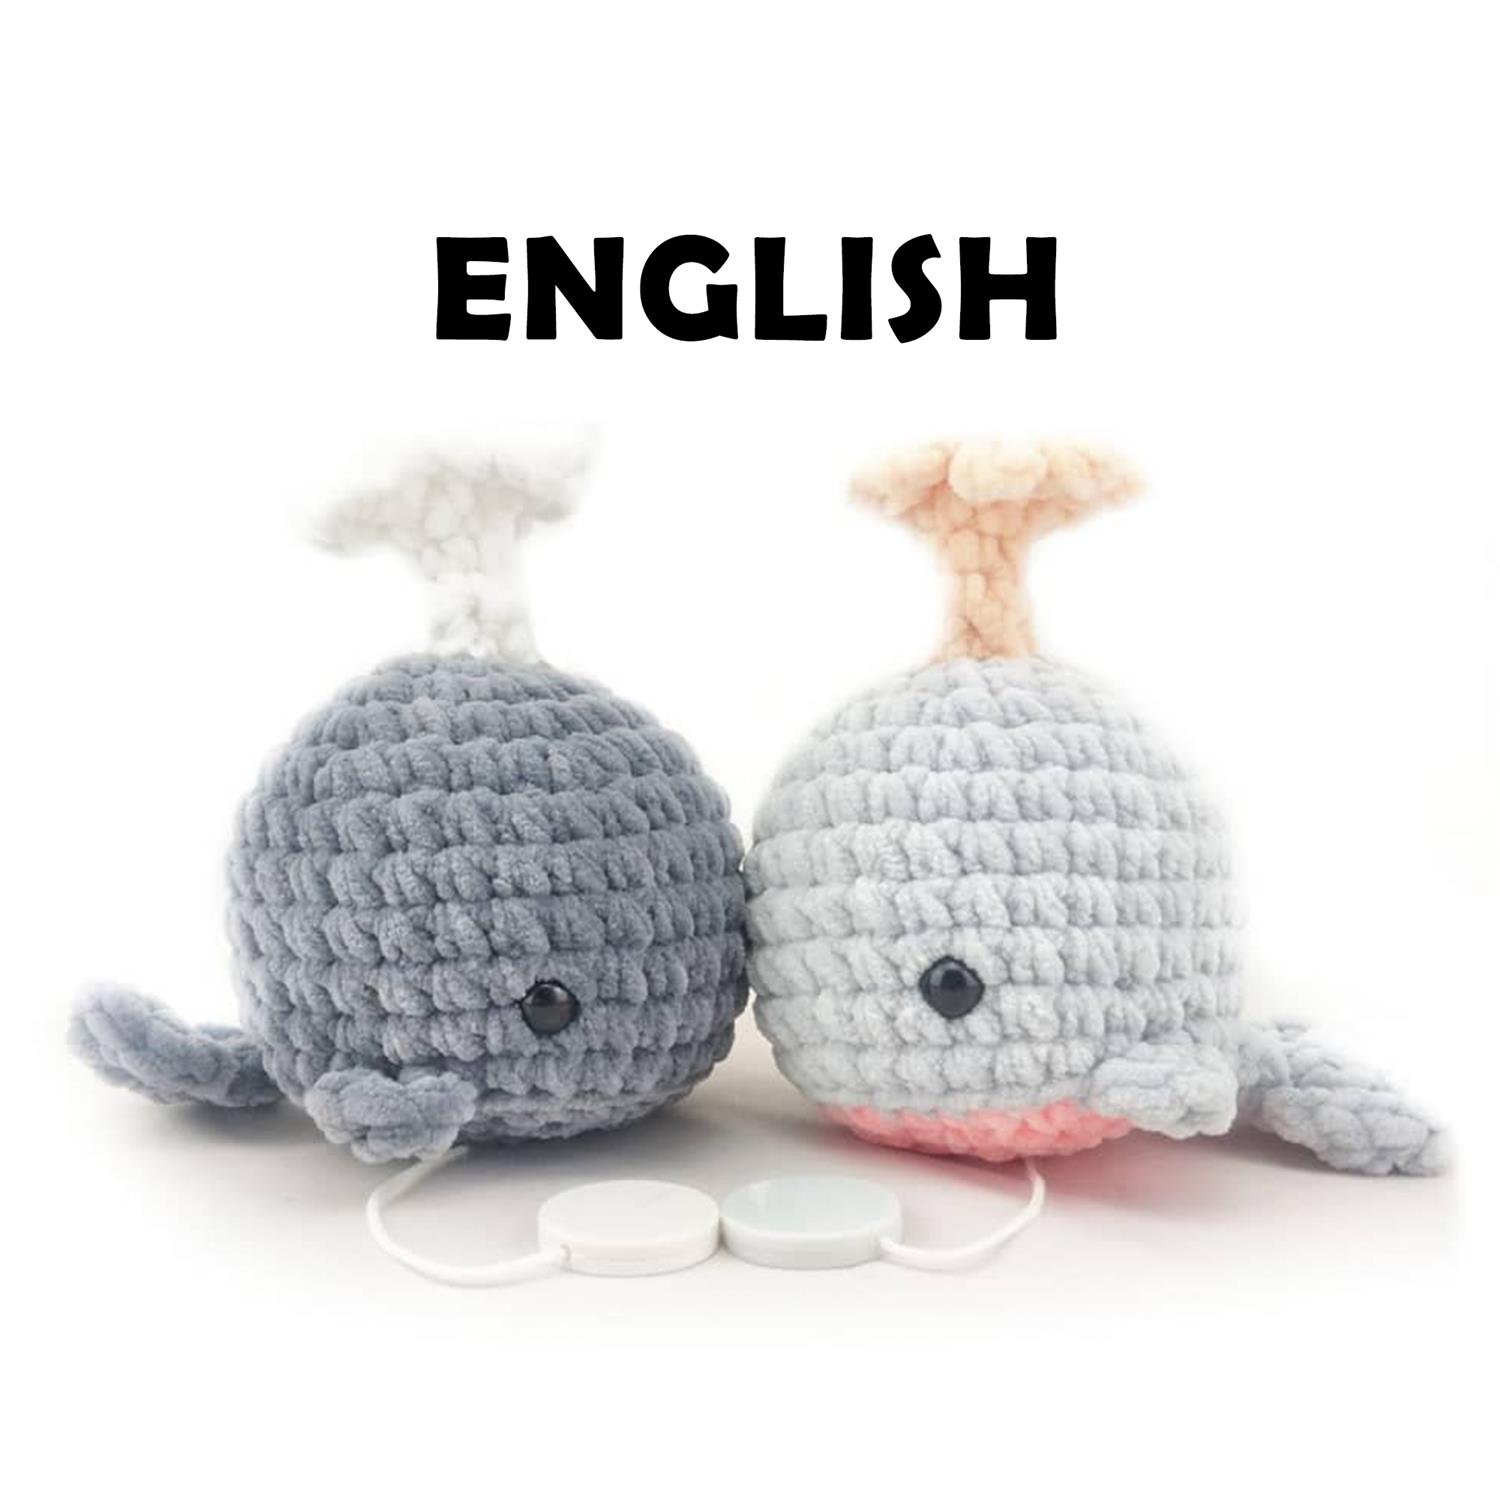 PDF ENGLISH, crochet pattern, Willy Whale by leami